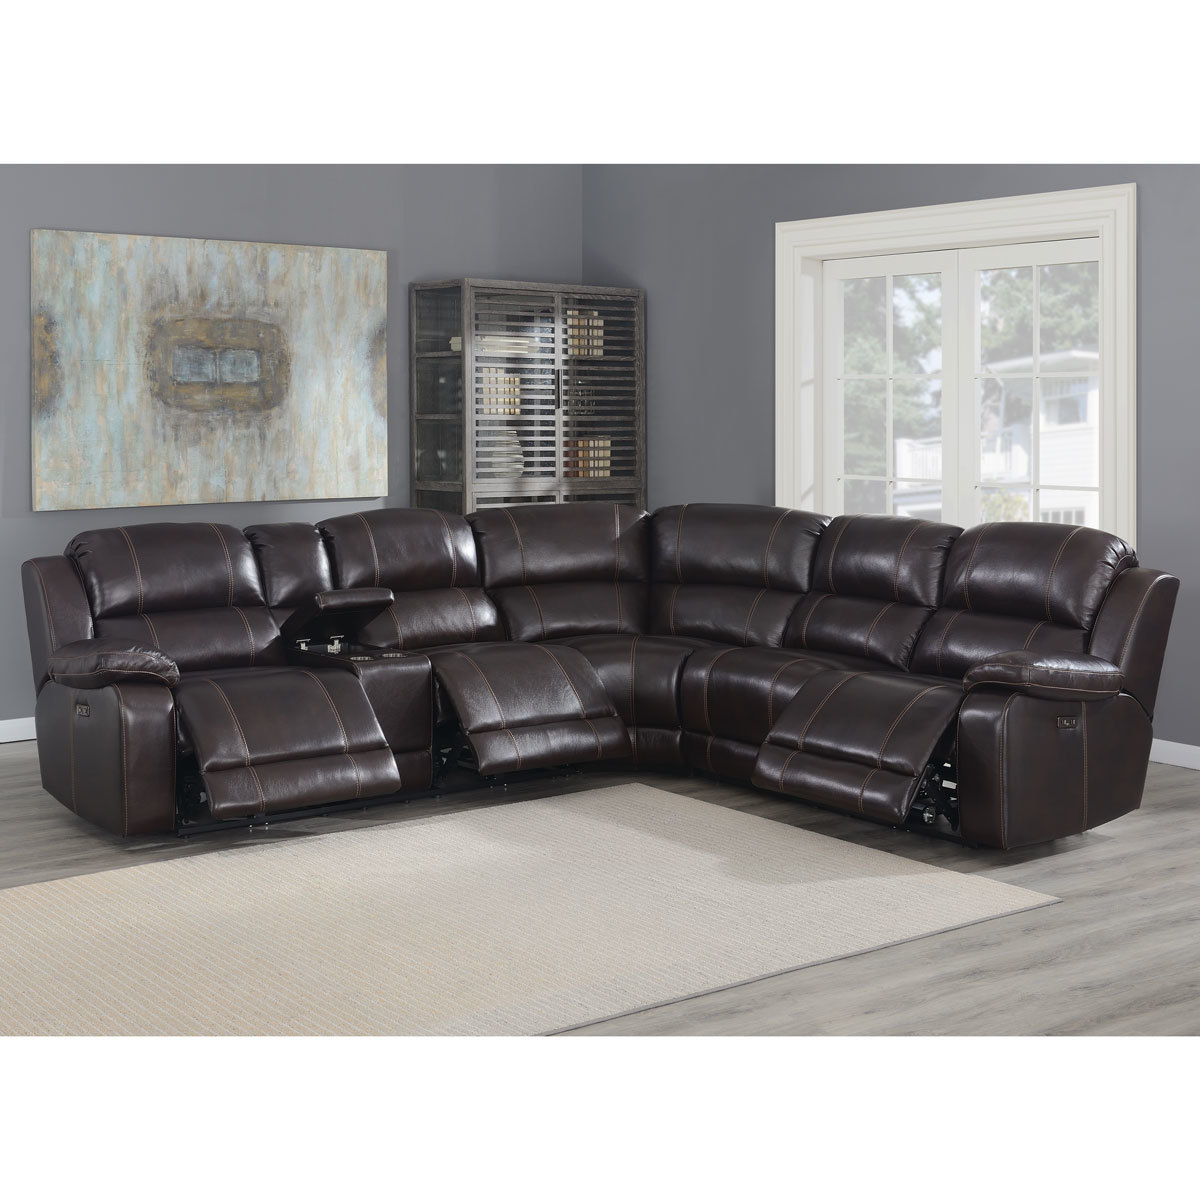 Pulaski Dunhill Brown Leather Power, Top Grain Leather Recliner Sofa Costco